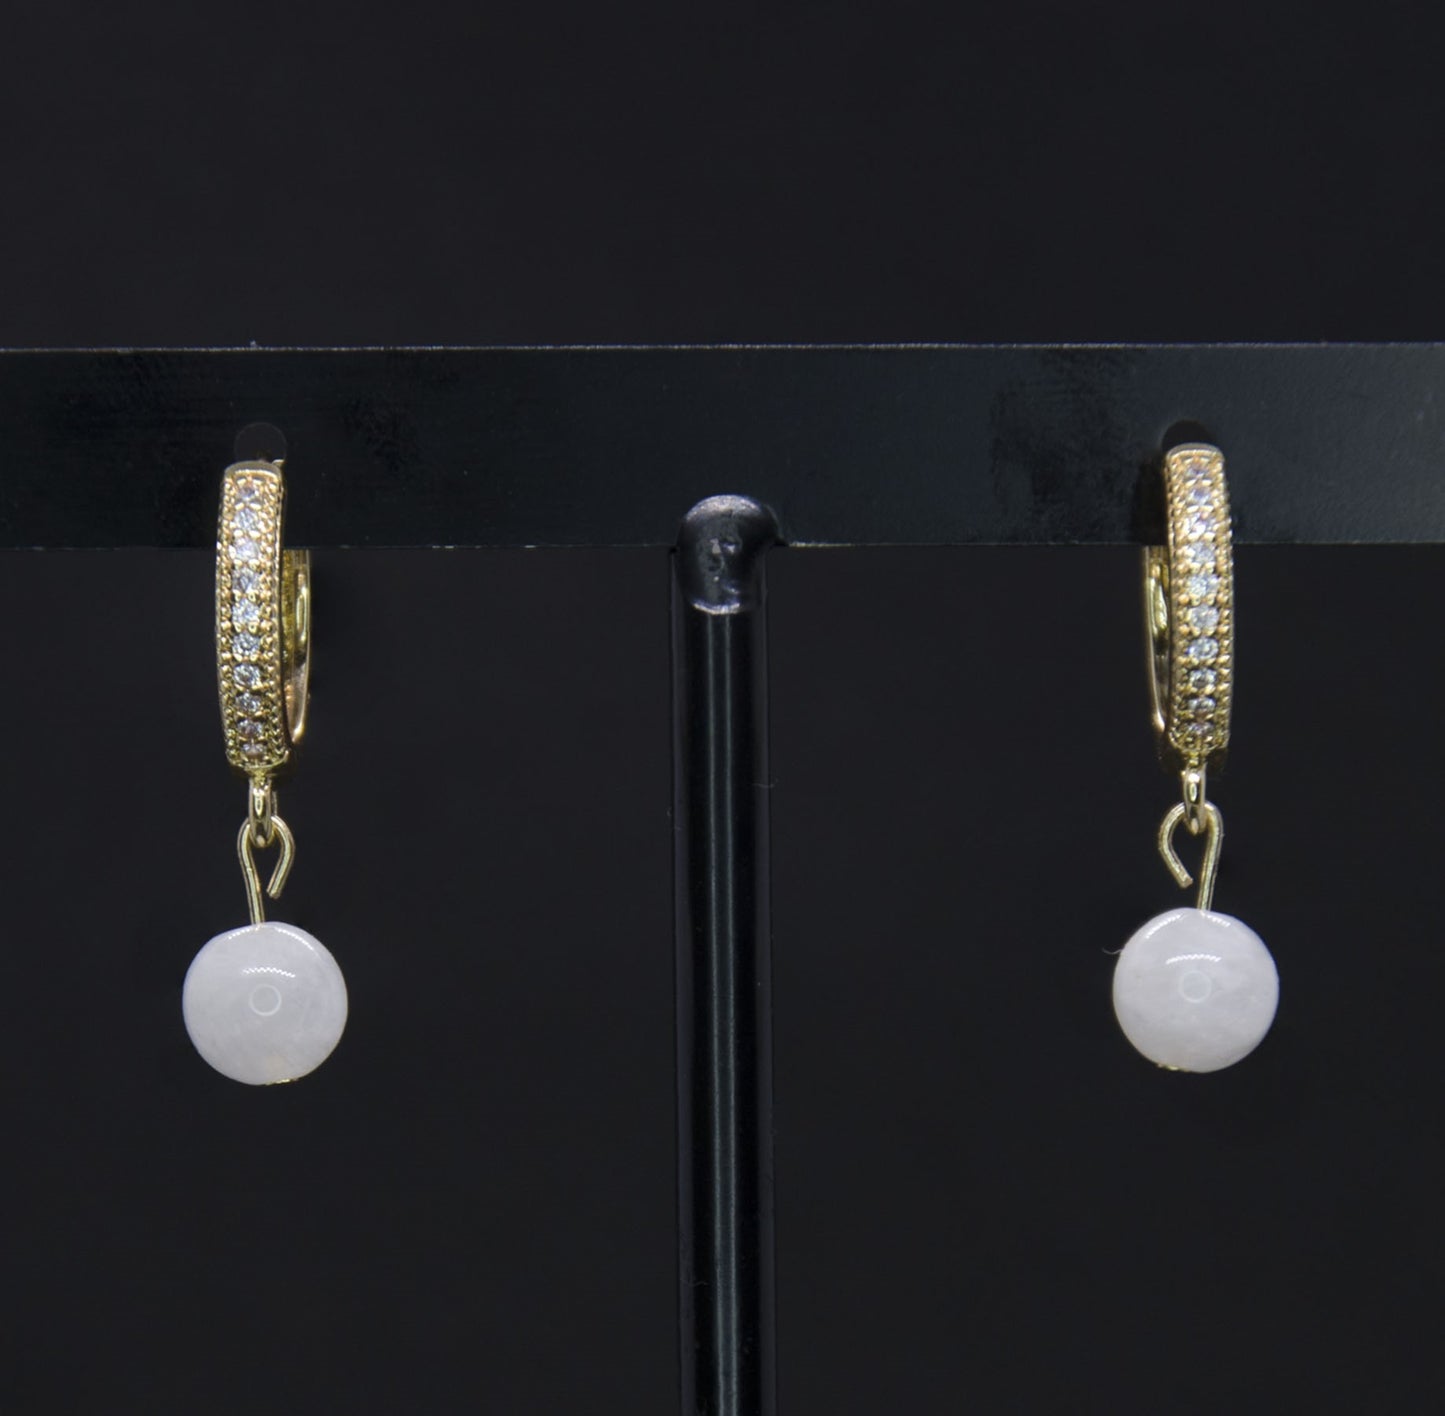 Intuition x Balance • Earrings • Moonstone & 14K Gold Plated